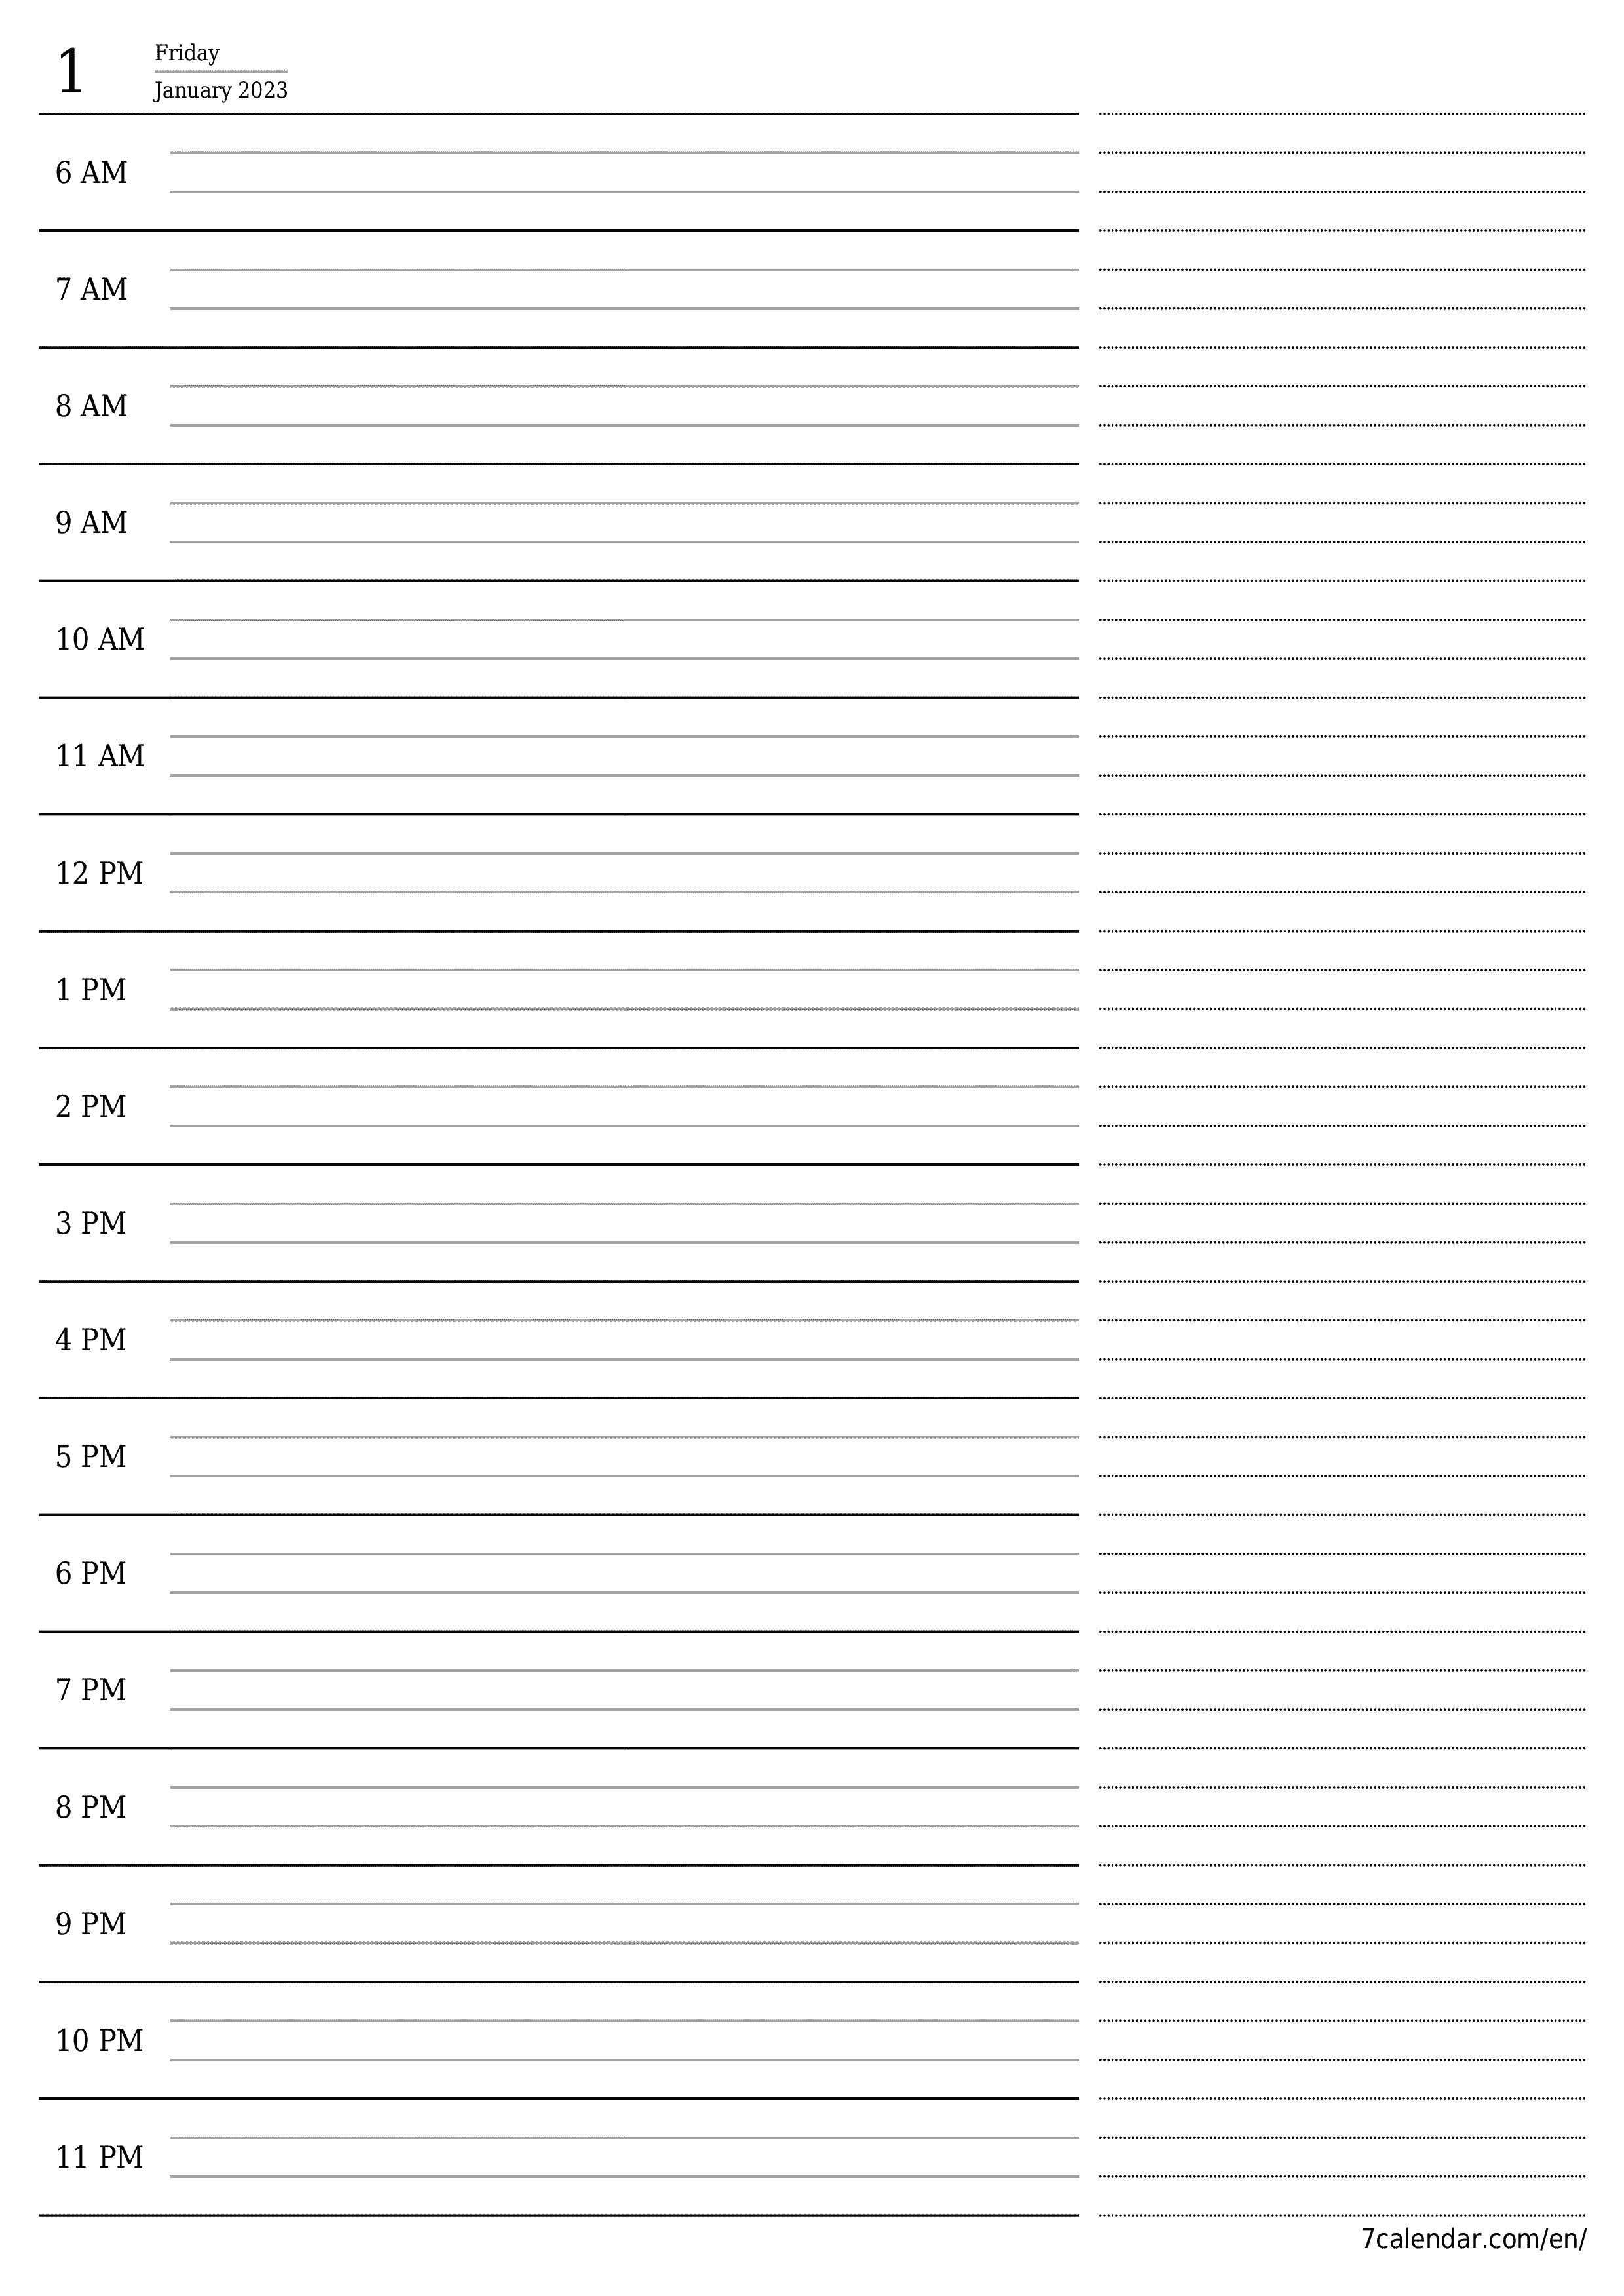 Blank daily printable calendar and planner for day January 2023 with notes, save and print to PDF PNG English